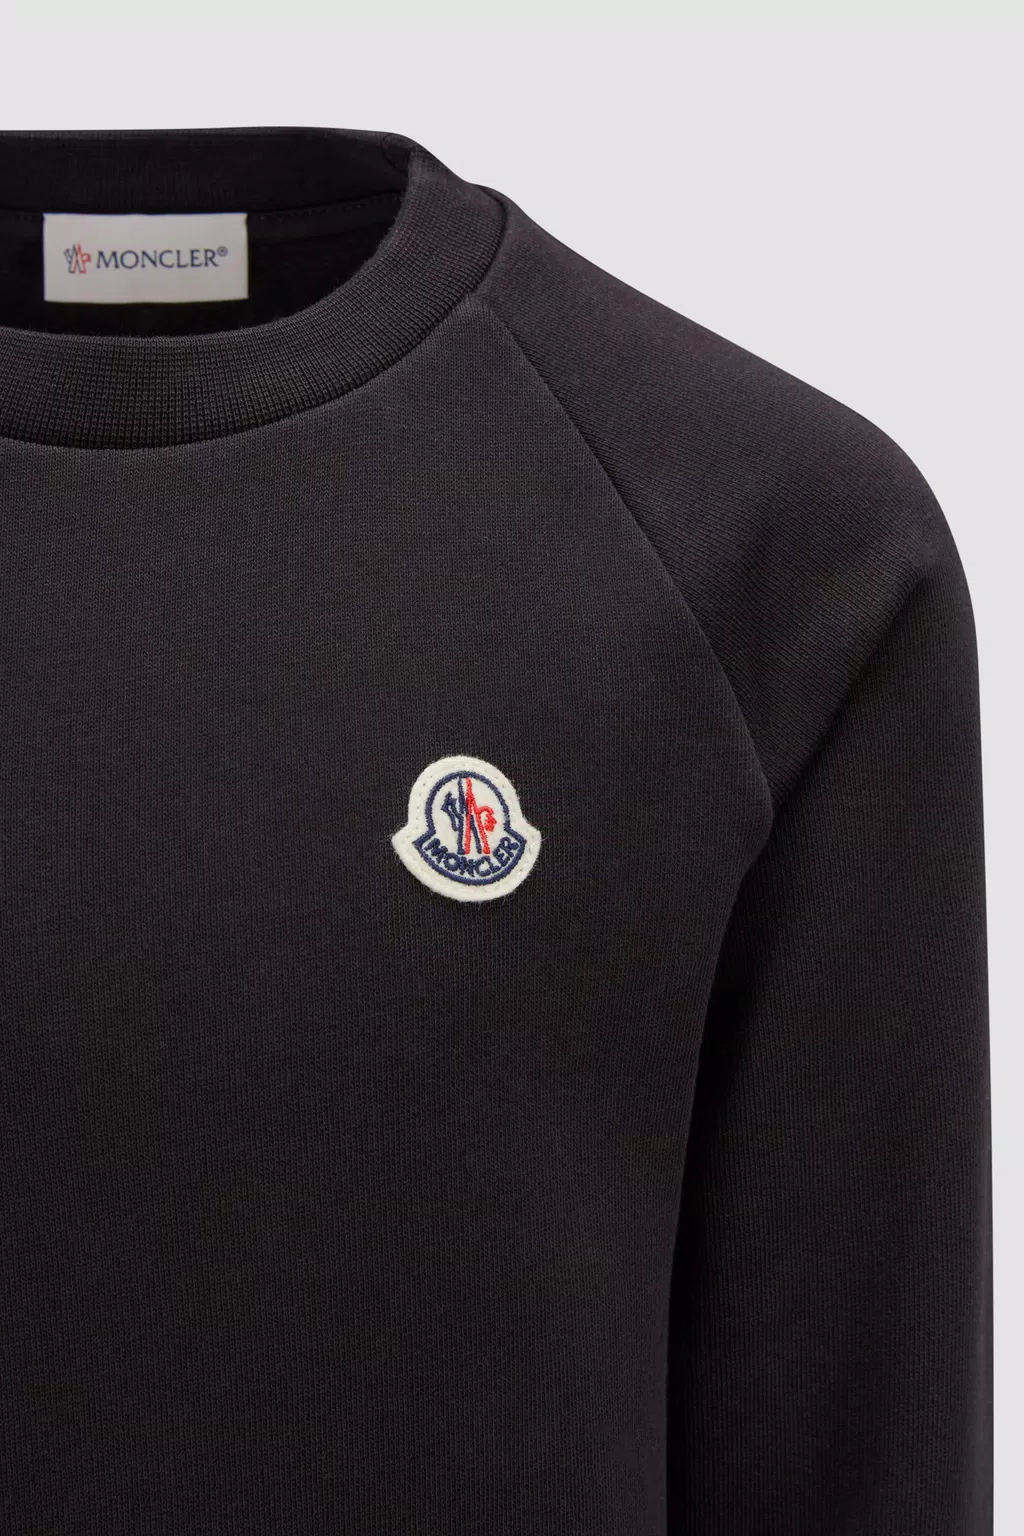 Back To School for Children - New In | Moncler EE